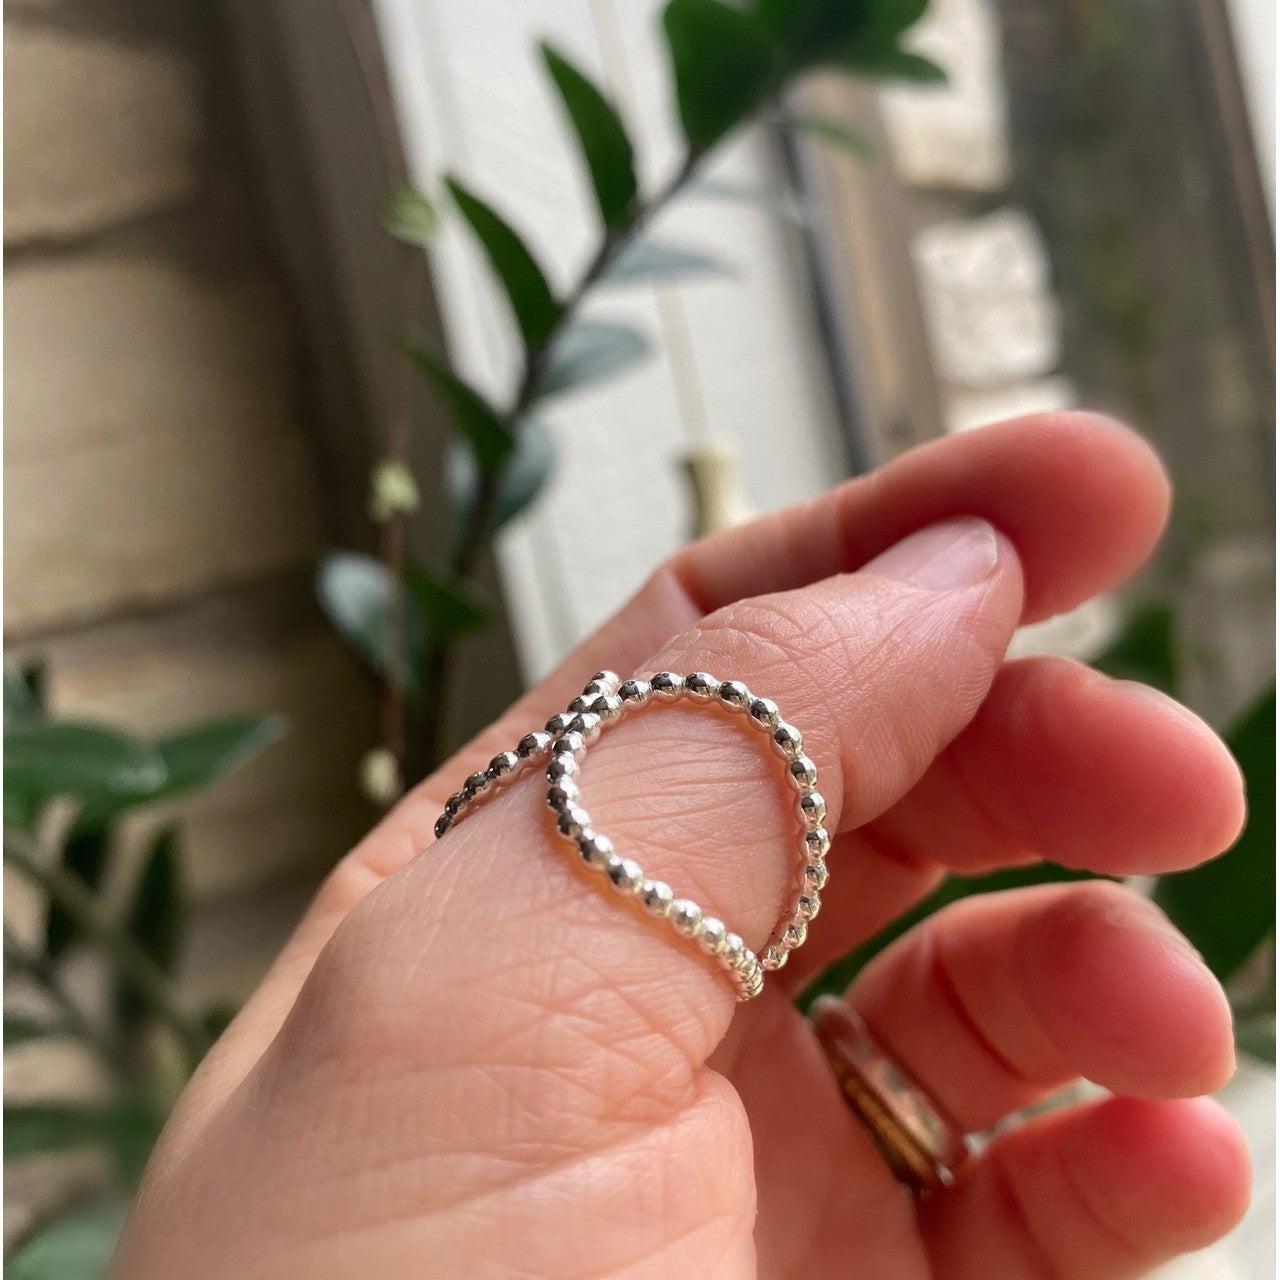 Teardrop Ring in Silver or Gold